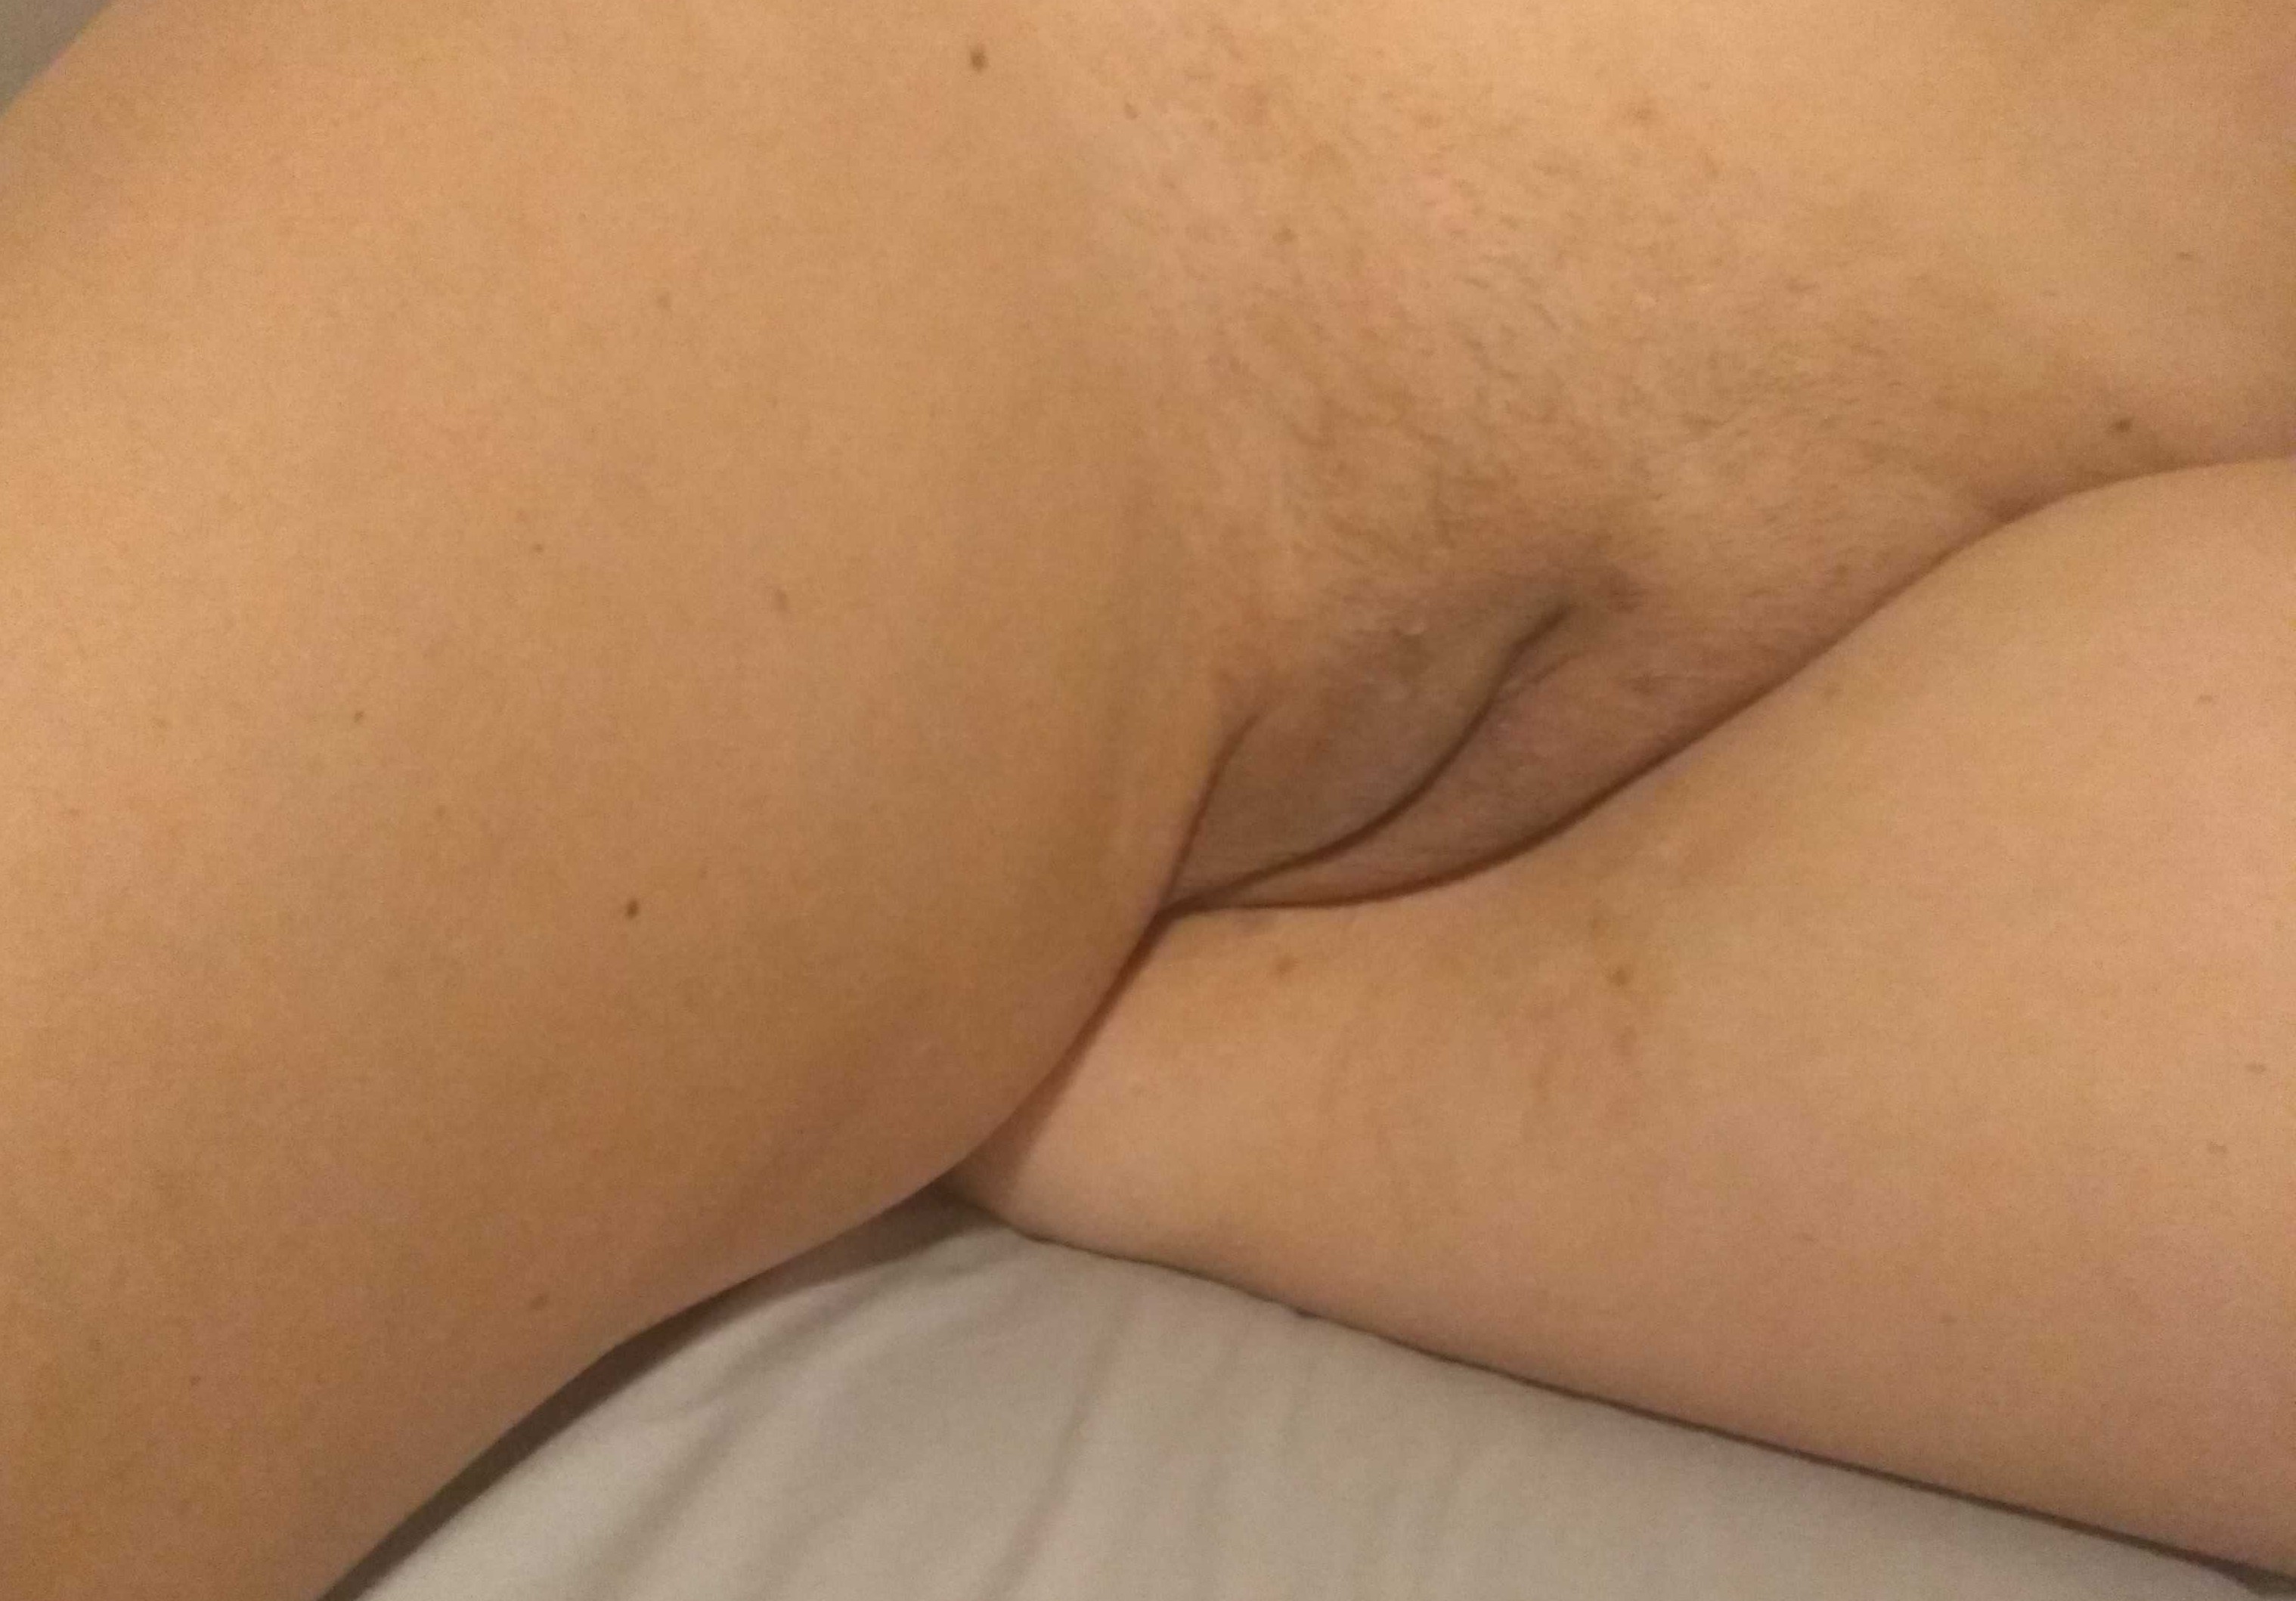 Play New Hd Bf - Bf away who wants to play? Porn Pic - EPORNER